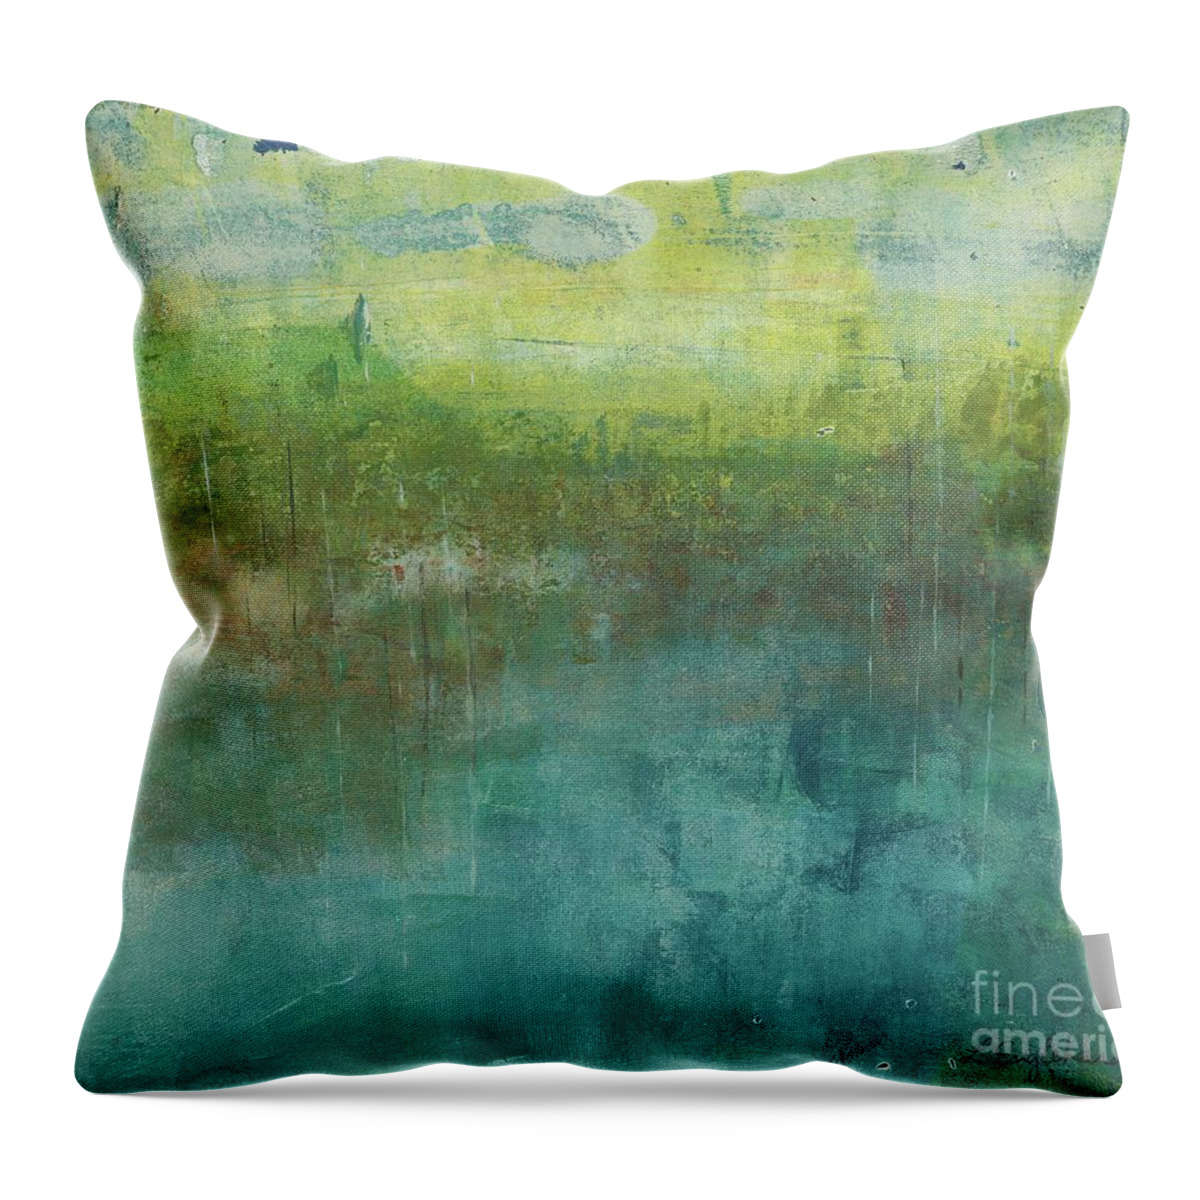 Abstract Throw Pillow featuring the painting Through The Mist 2 by Laurel Englehardt